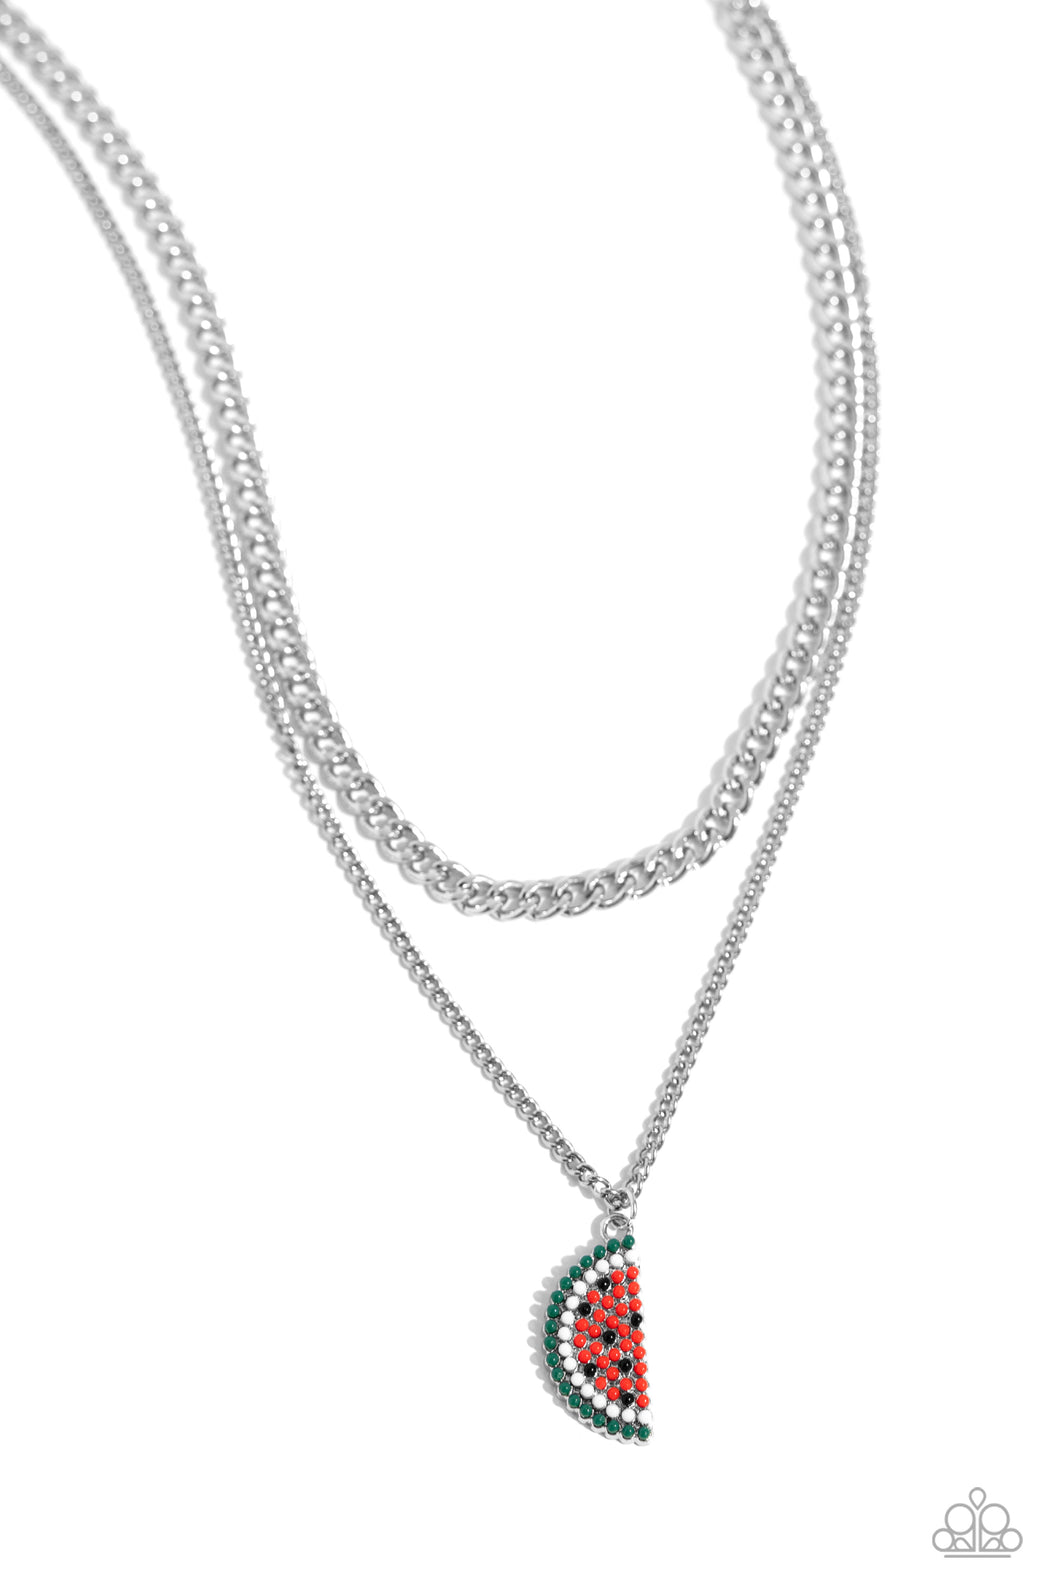 Paparazzi Watermelon Whimsy Red Necklace for Women. Get Free Shipping. Summer Accessories.  